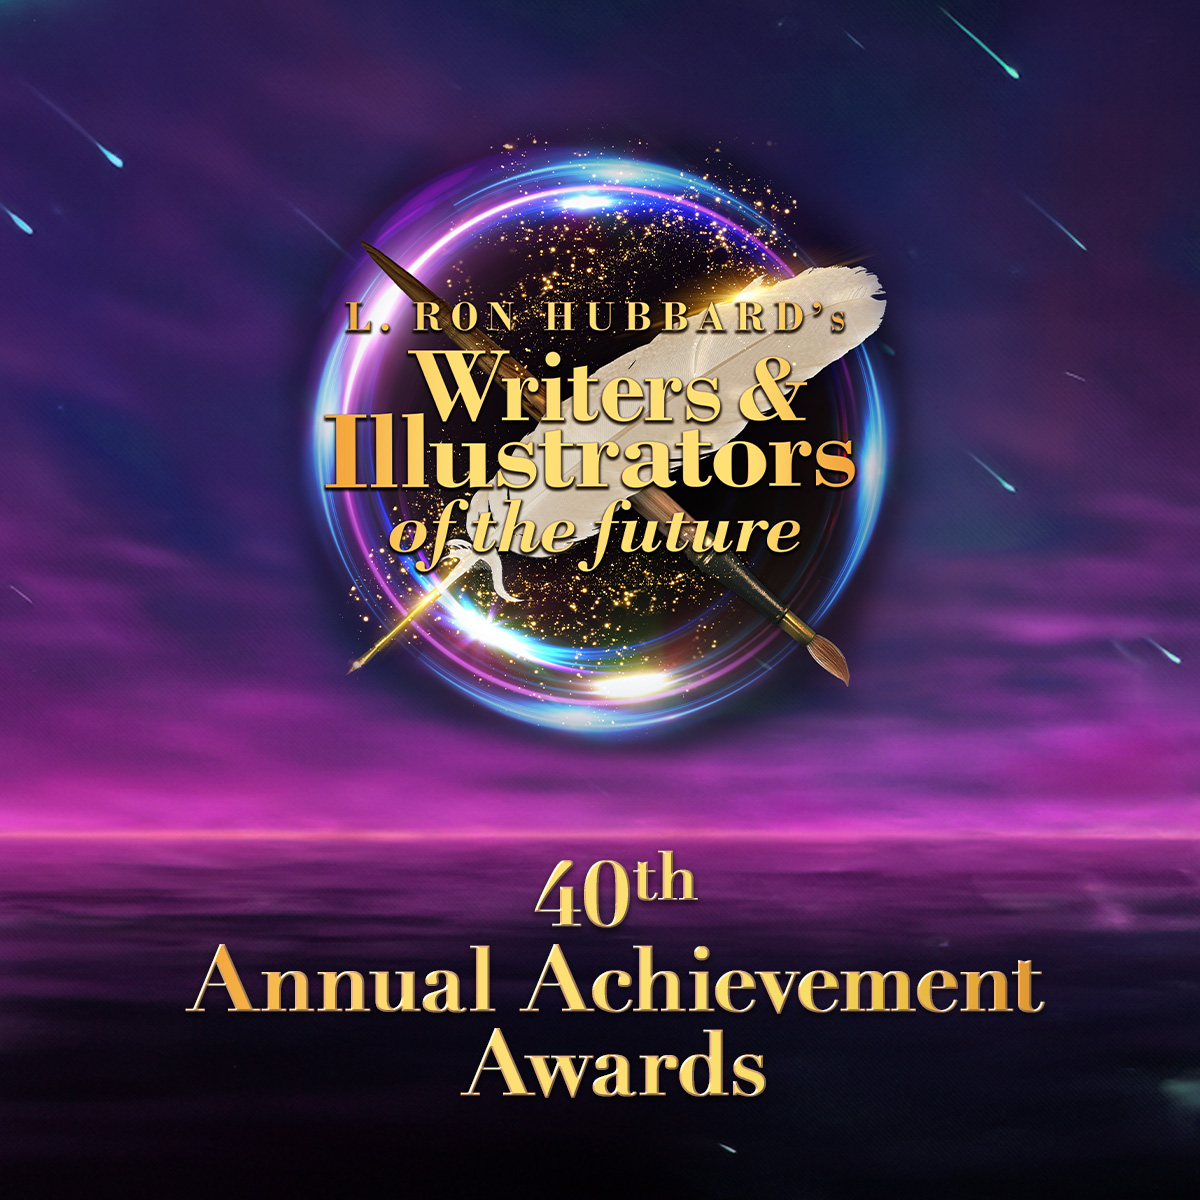 🌟 Join us live for a night of inspiration! Don’t miss the 40th Annual #LRonHubbard Achievement Awards, streaming on April 25, 2024, at 7 PM PST (10 PM EST). Witness the future of creativity at WritersoftheFuture.com 🌟

#WOTF40 #WritersOfTheFuture #IllustratorsOfTheFuture